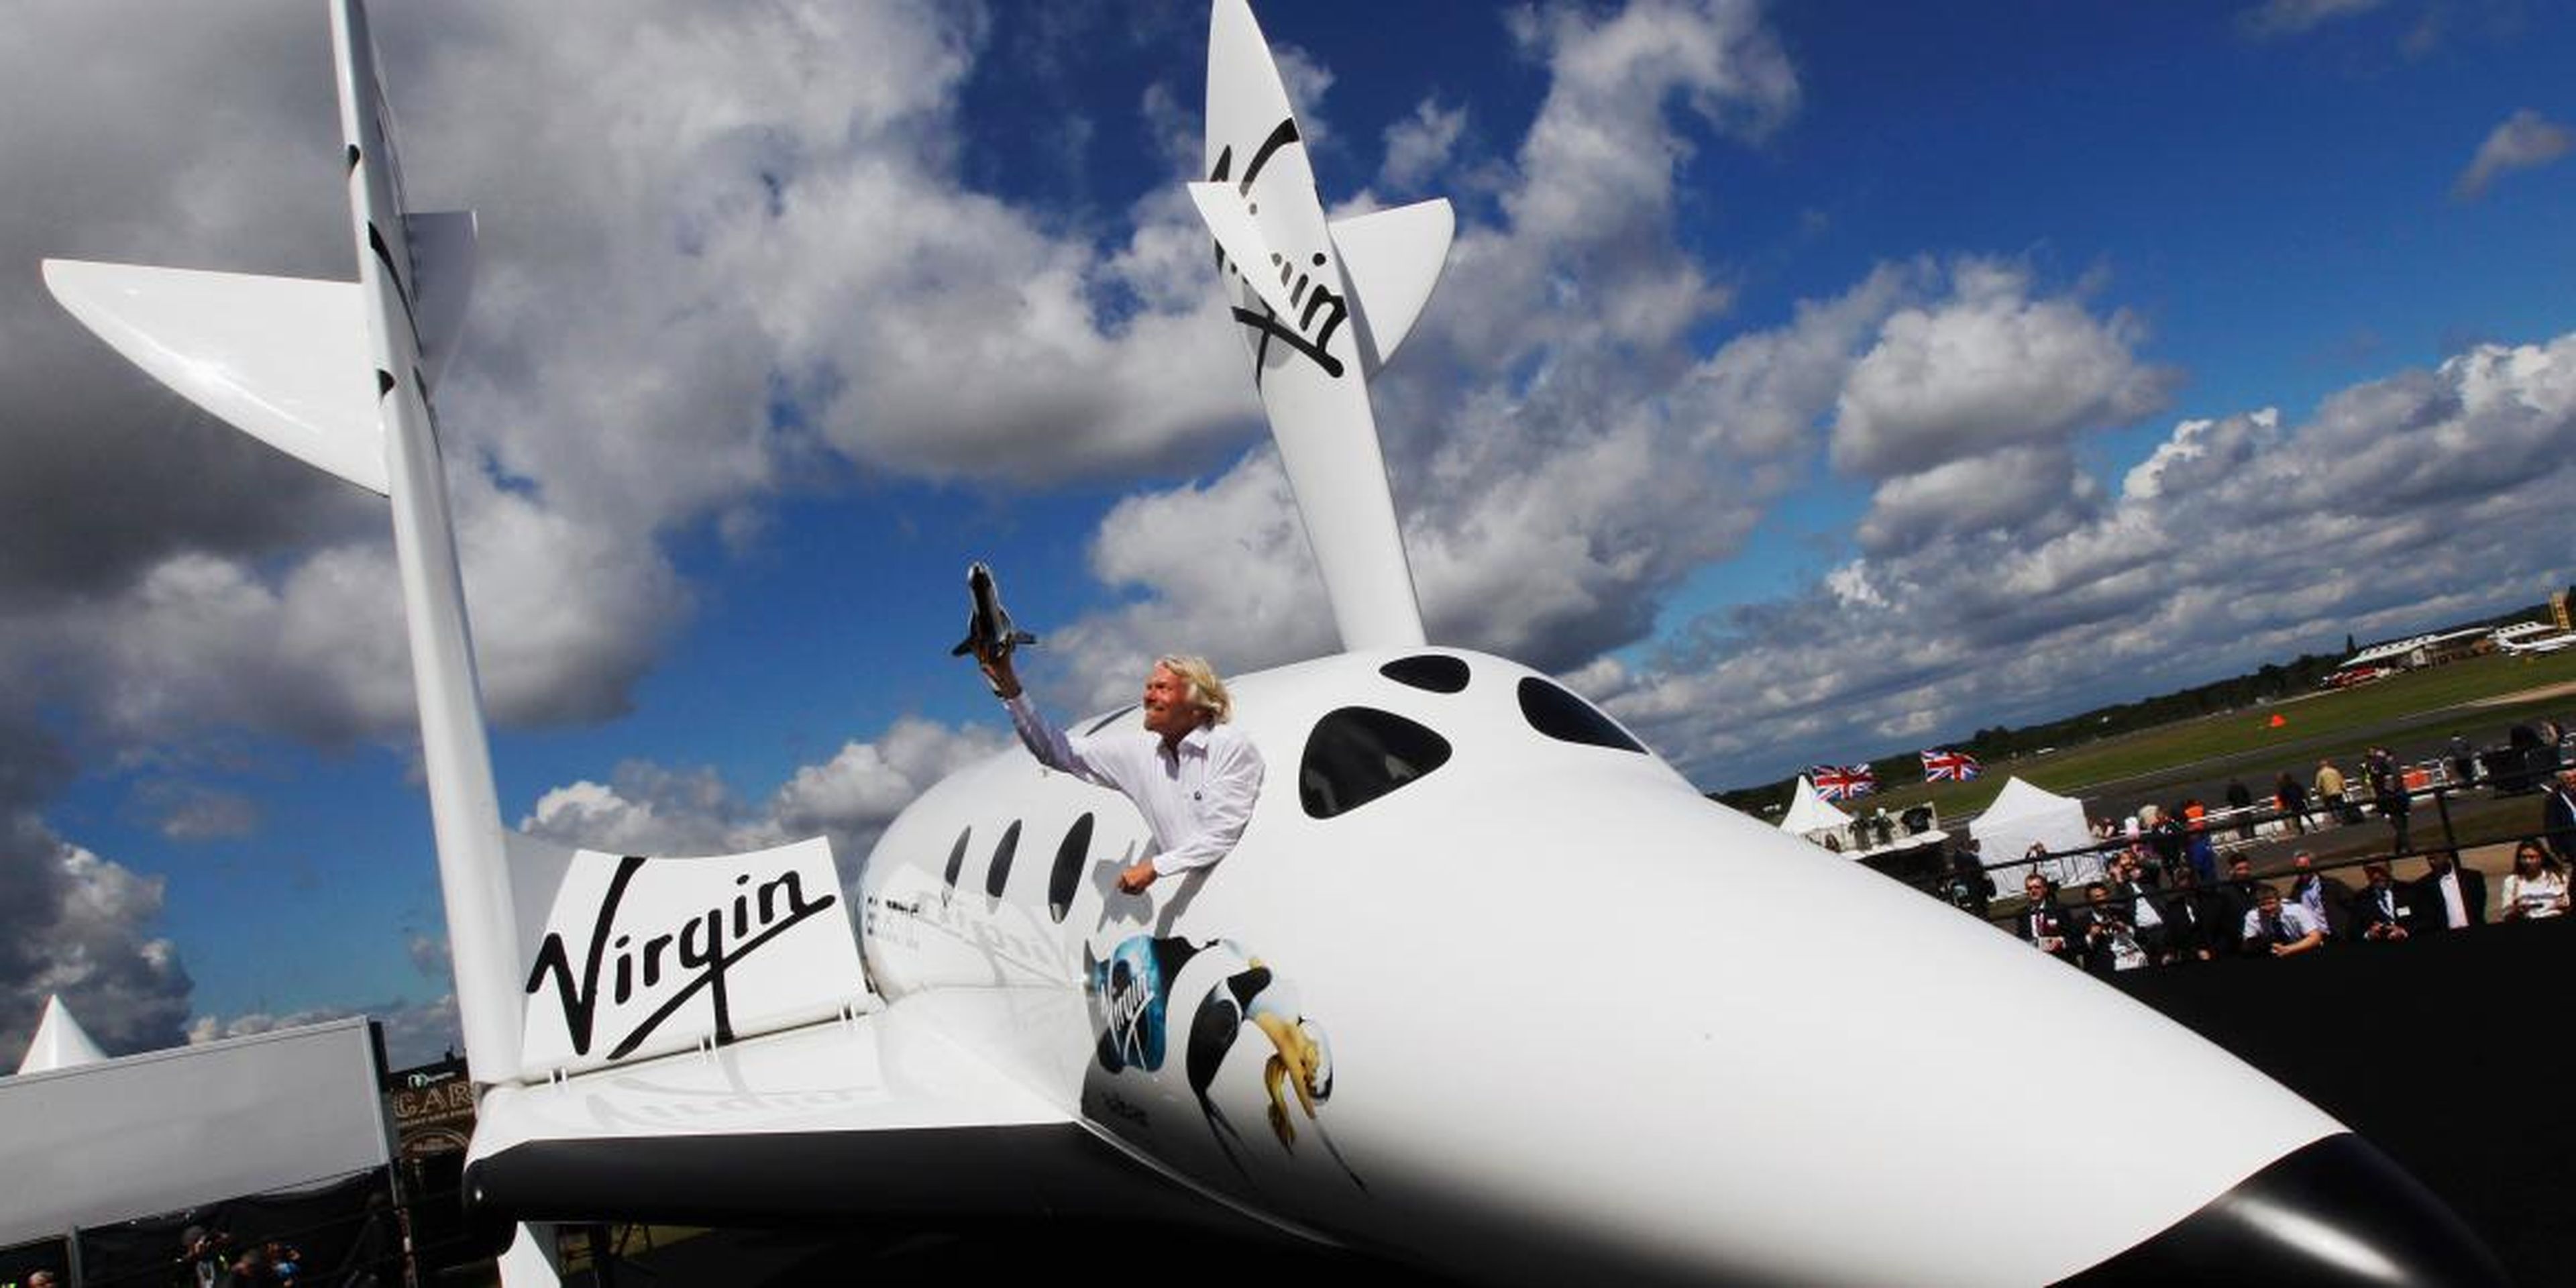 Virgin Galactic leaps after Morgan Stanley says the company's stock can jump 203% over the next year